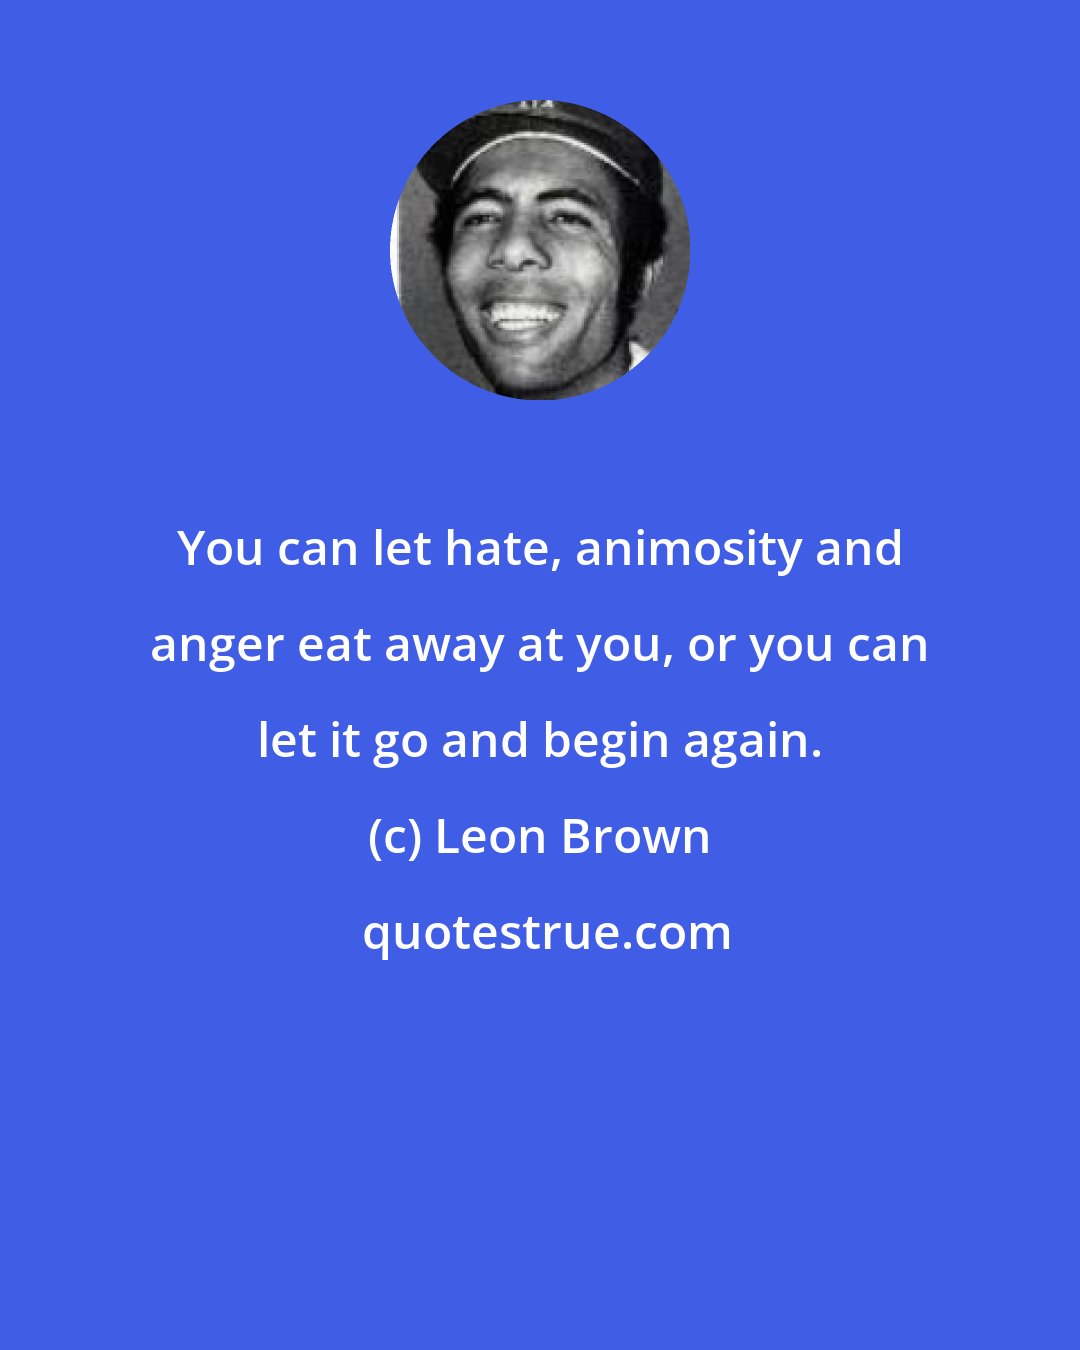 Leon Brown: You can let hate, animosity and anger eat away at you, or you can let it go and begin again.